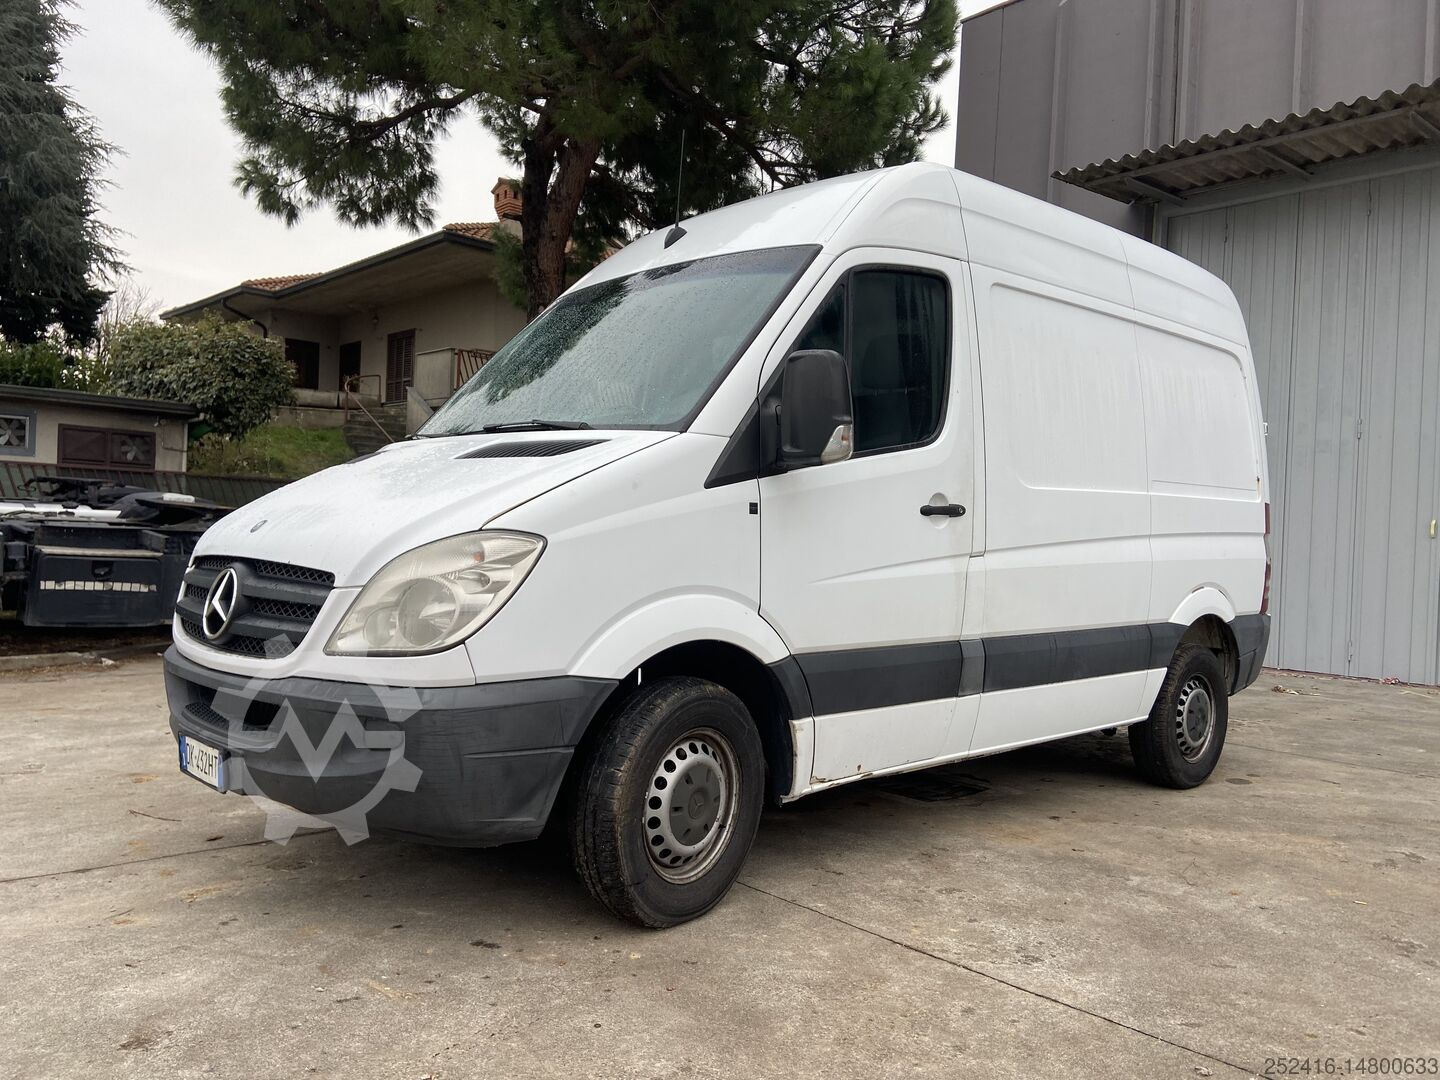 The Unlikely History of the Mercedes-Benz Sprinter Van